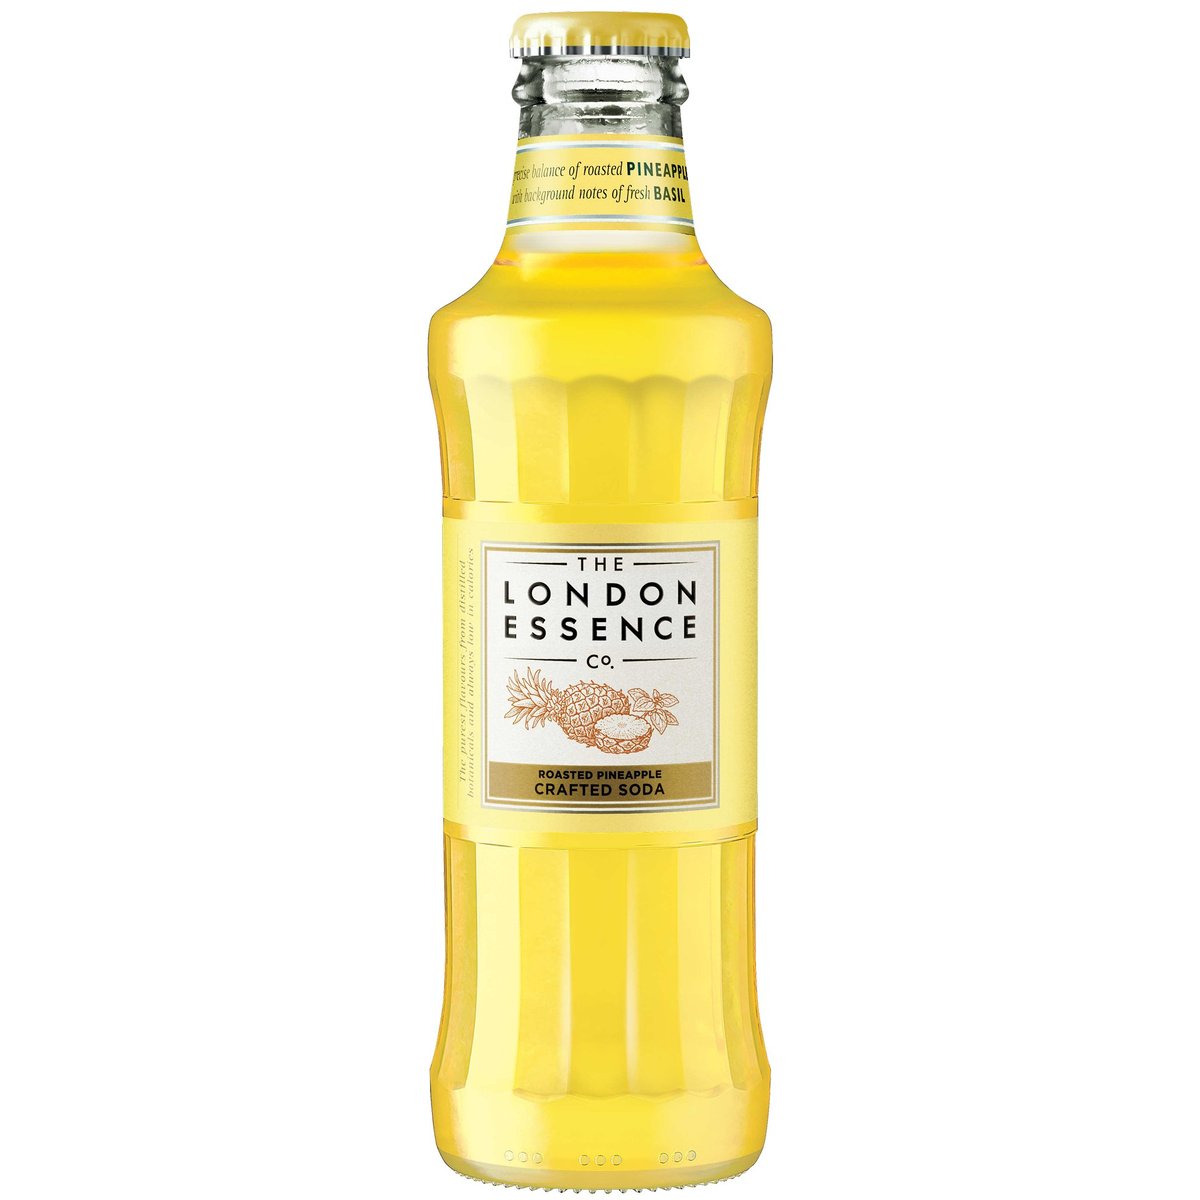 The London Essence Roasted Pineapple Crafted Soda